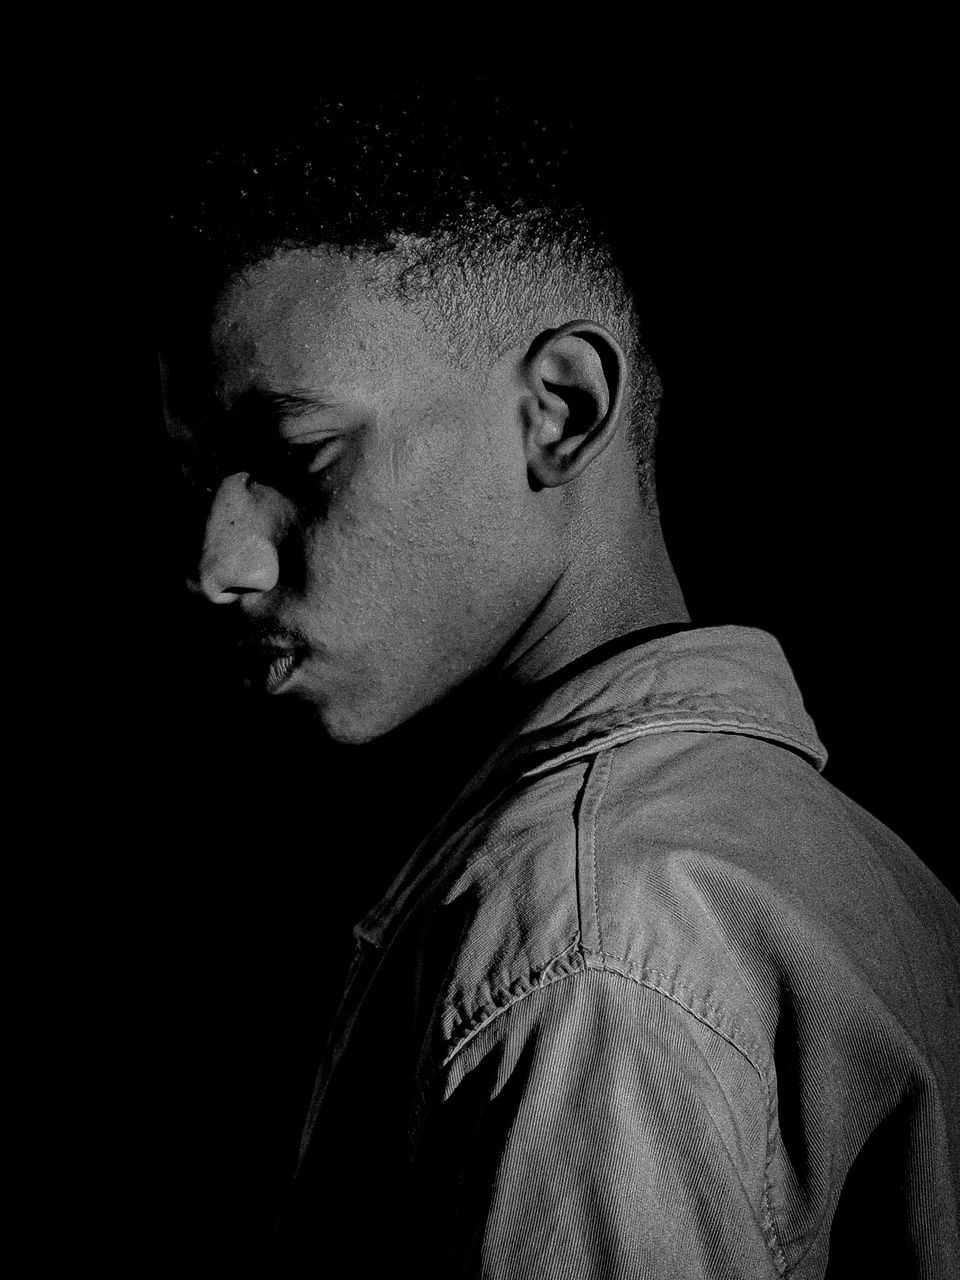 black and white, one person, black, darkness, black background, portrait, monochrome photography, monochrome, studio shot, headshot, adult, indoors, side view, men, looking, profile view, looking away, serious, copy space, dark, close-up, young adult, contemplation, lifestyles, person